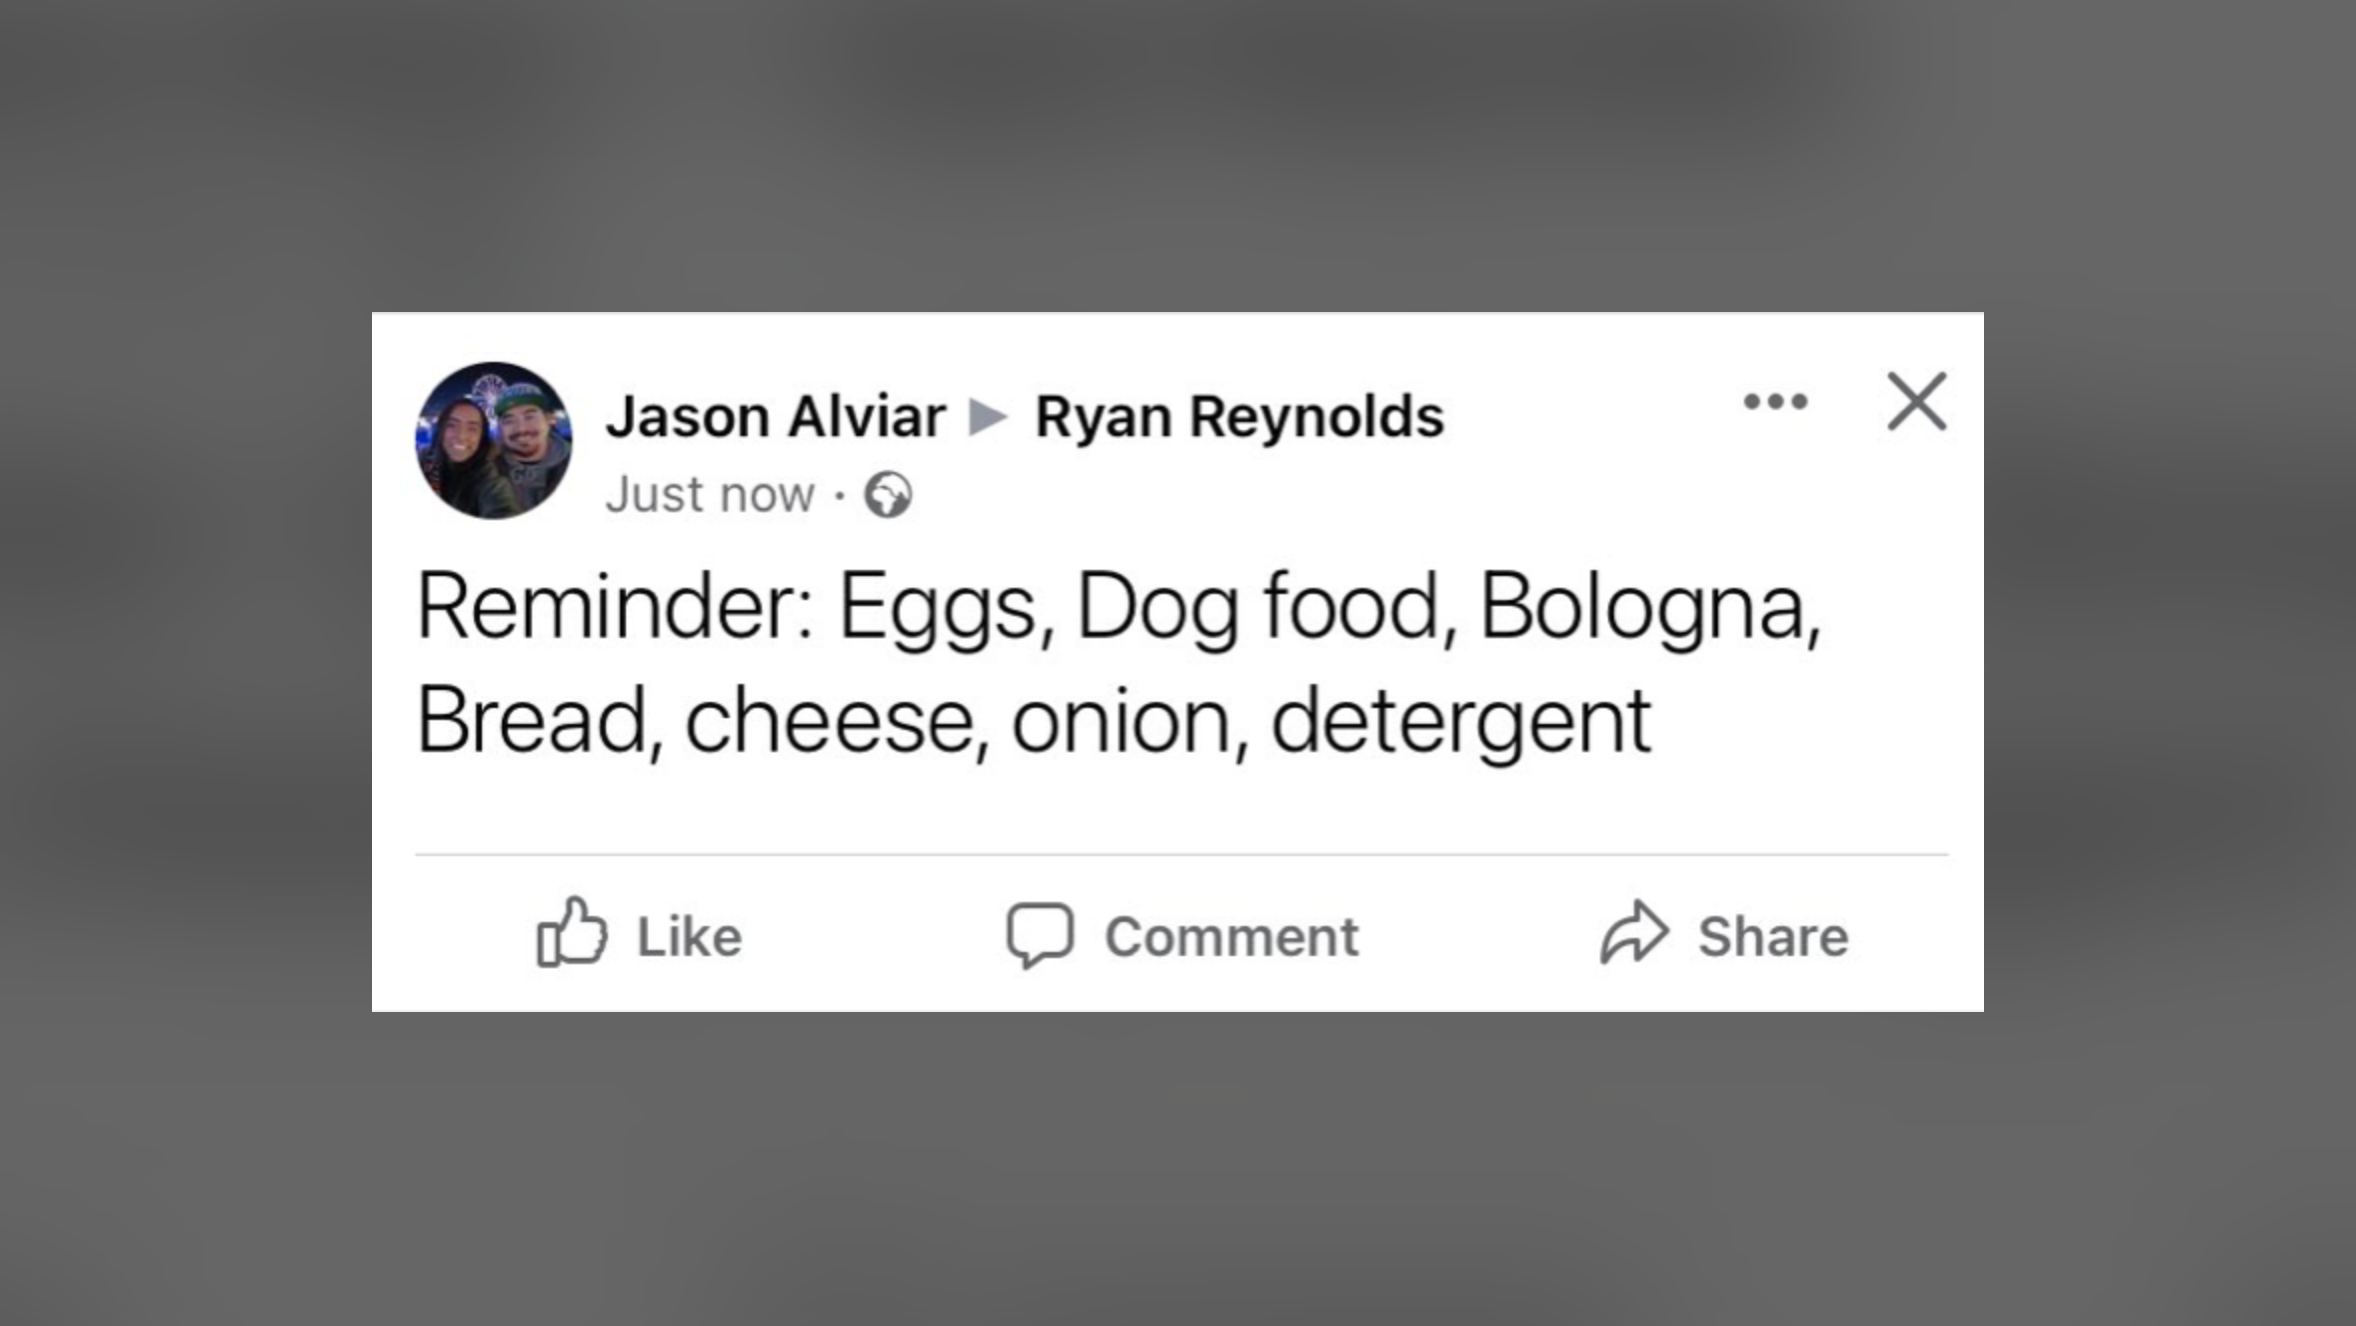 11 Extremely Unhinged Posts Facebook Promoted Due to a Big Celebrity Page Bug